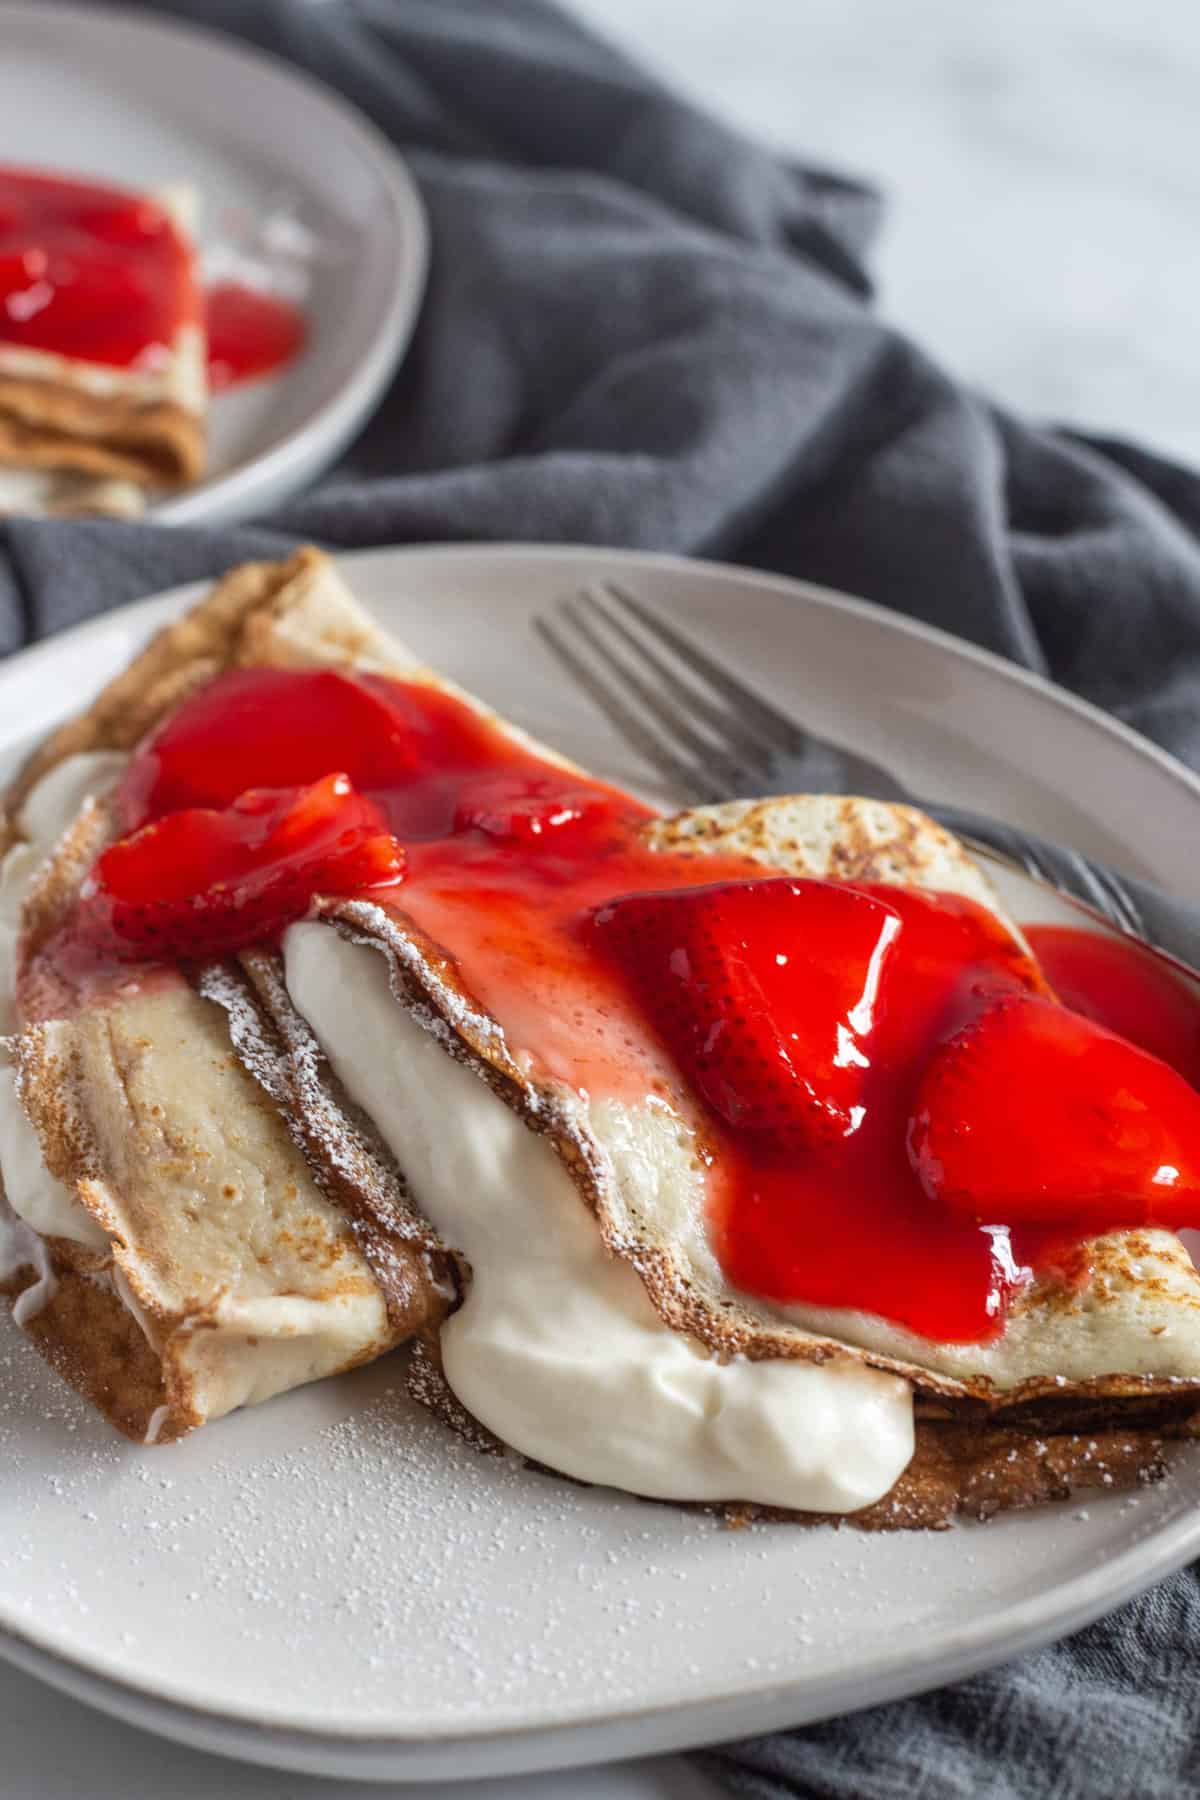 Strawberry crepes on a white plate.